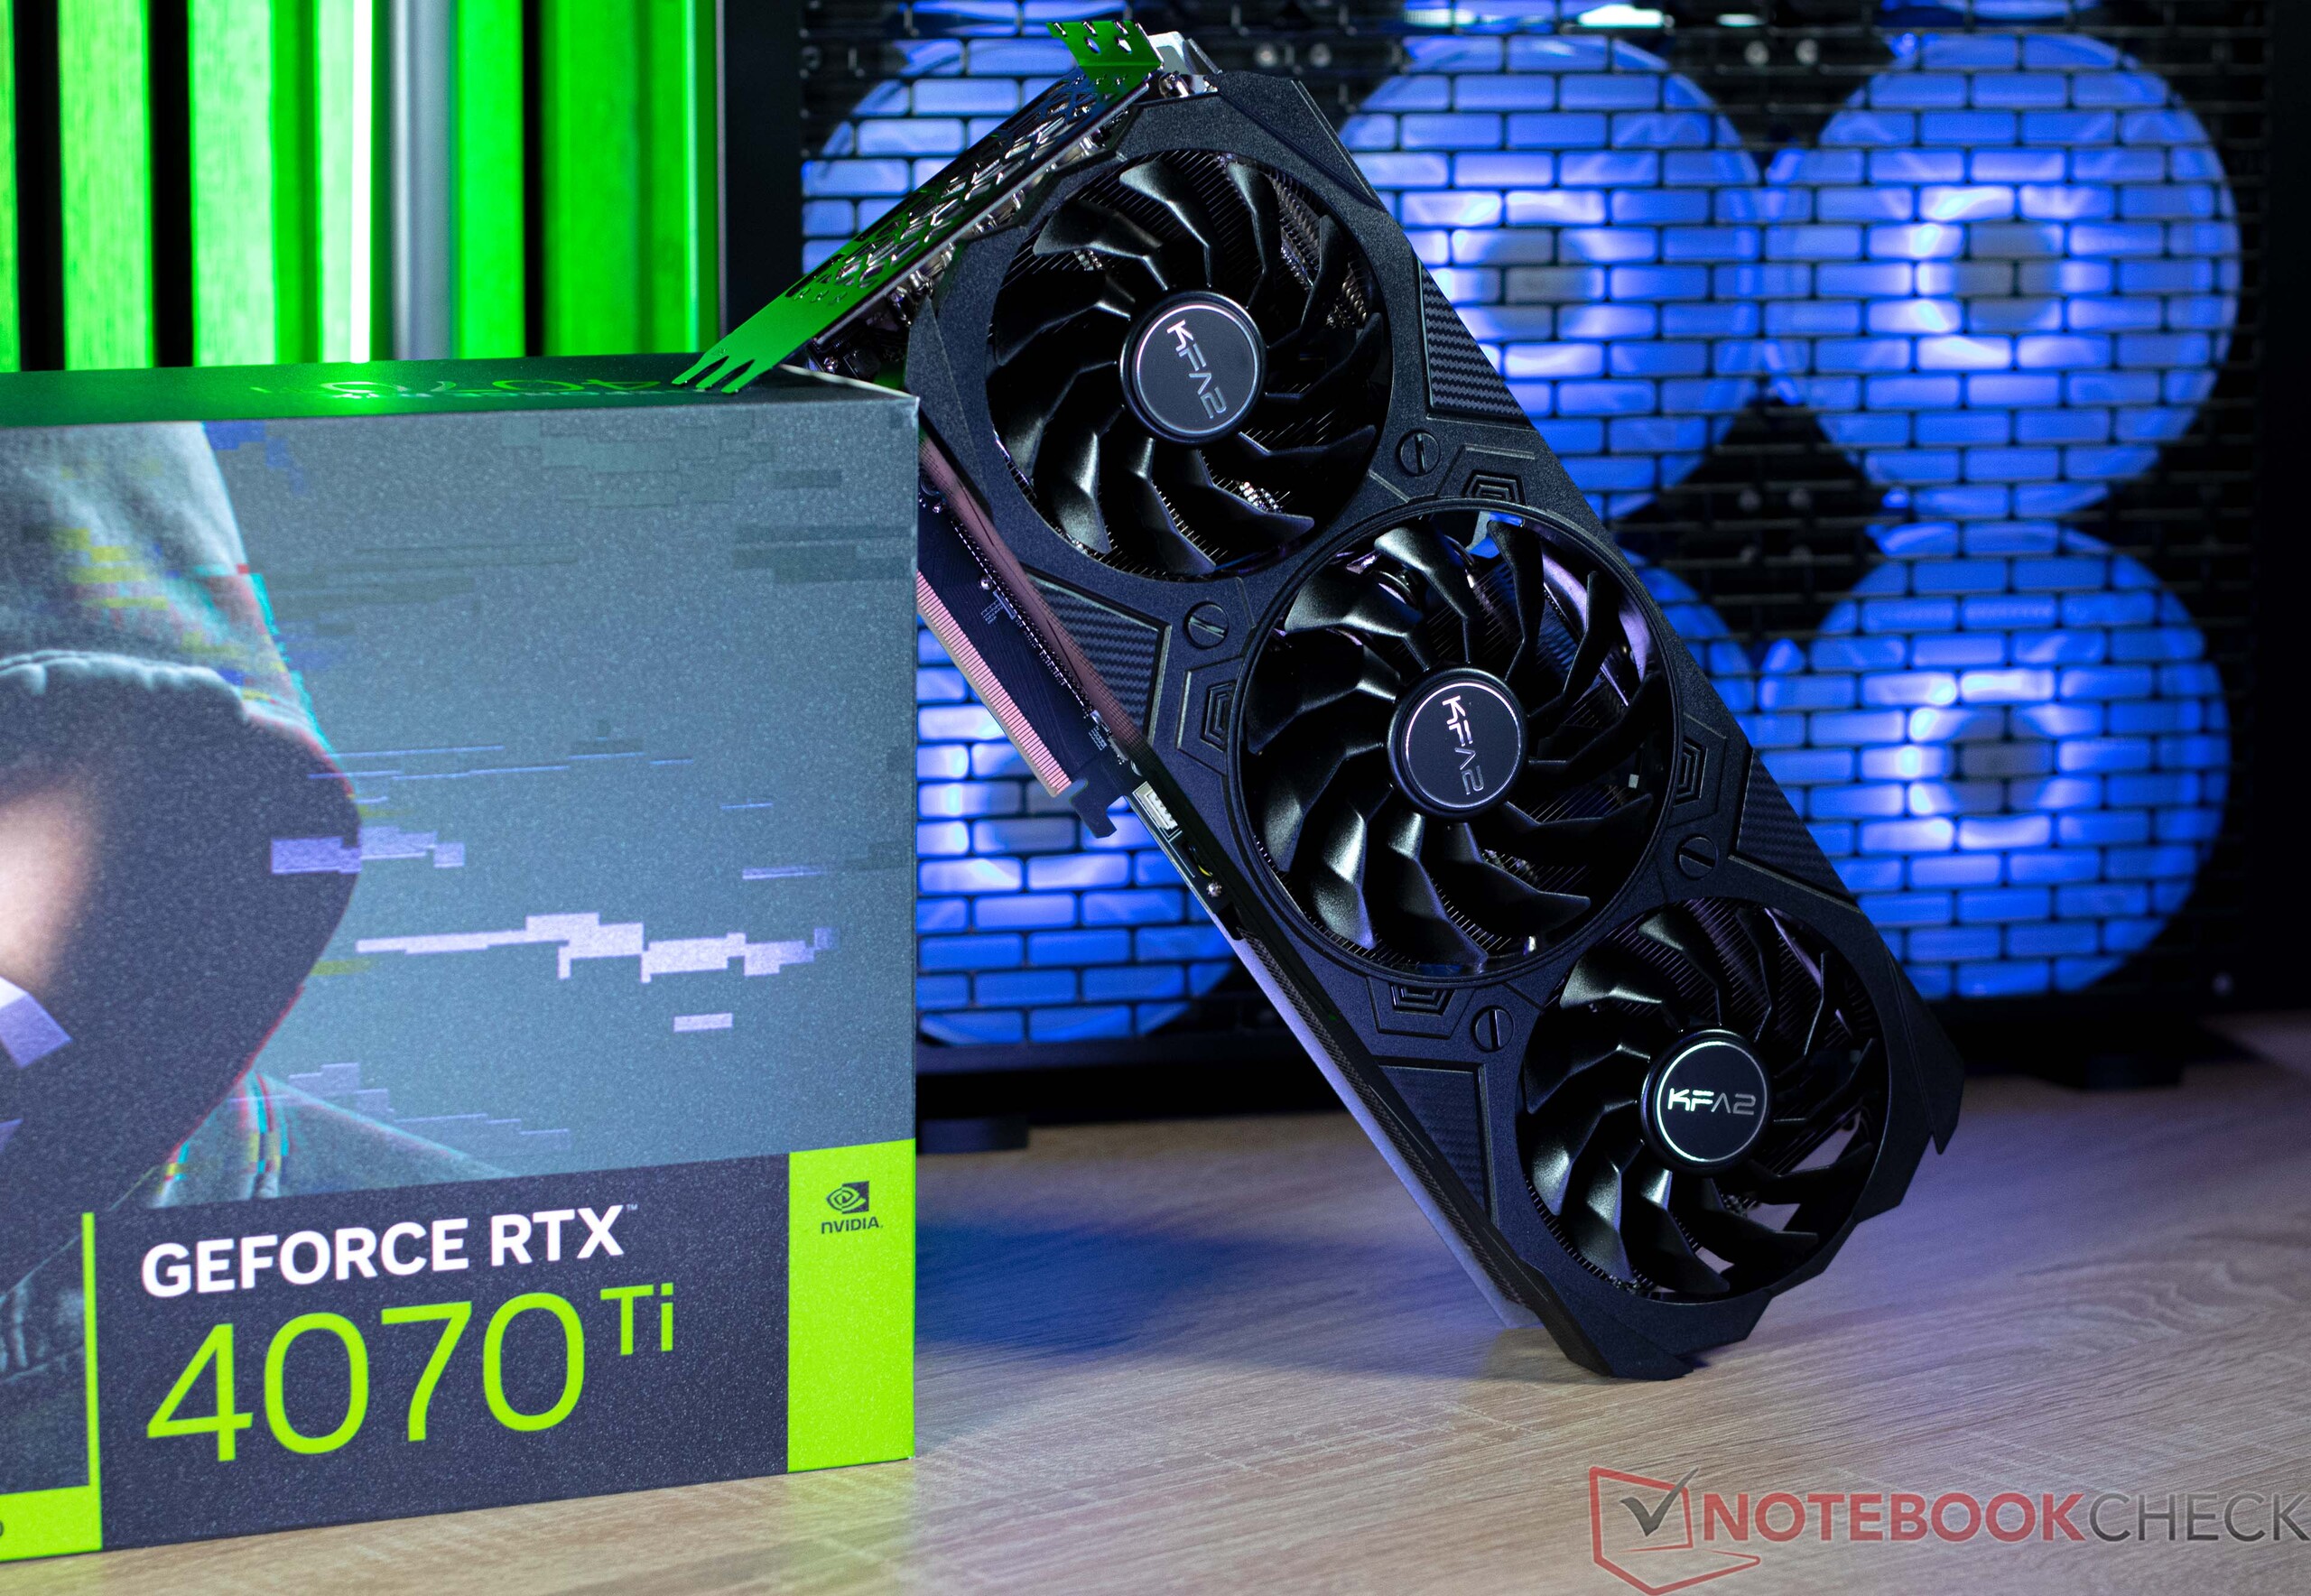 GeForce RTX 4070 GPU Review: It Hits the Bull's-Eye of the Middle - CNET